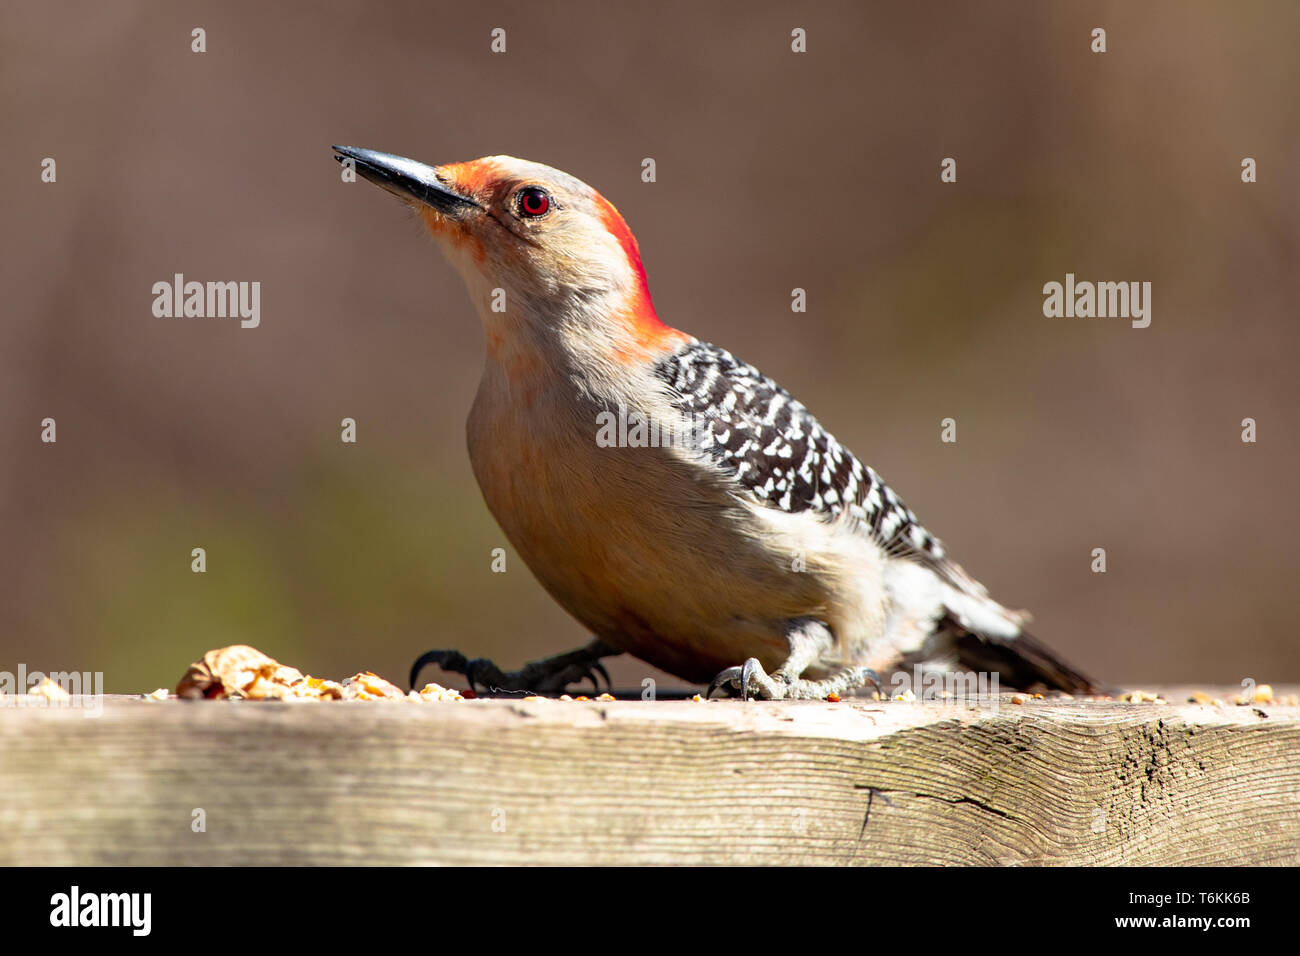 Fauna Avian Colourful Colorful Bird Birds Red Bellied Woodpecker Stock Photo